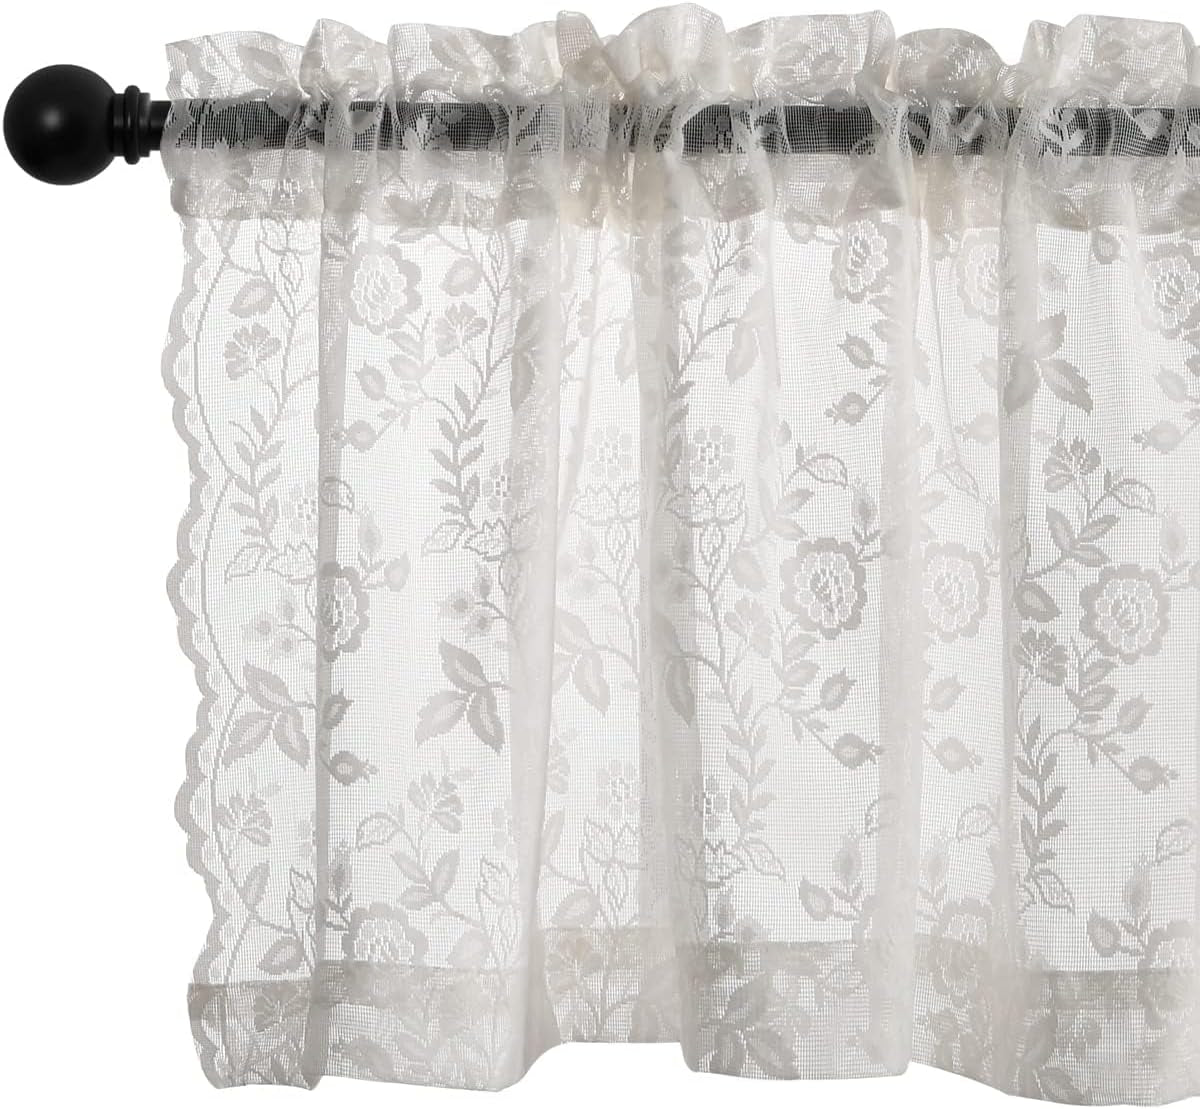 FINECITY Lace Curtains Country Rustic Floral Sheer Curtains for Living Room 72 Inch Length Drapes Vintage Floral Pattern Farmhouse Privacy Light Filtering Sheer Curtain 2 Panels, 52 X 72 Inch, Grey  Keyu Textile Ivory W52 X L18 Inch 